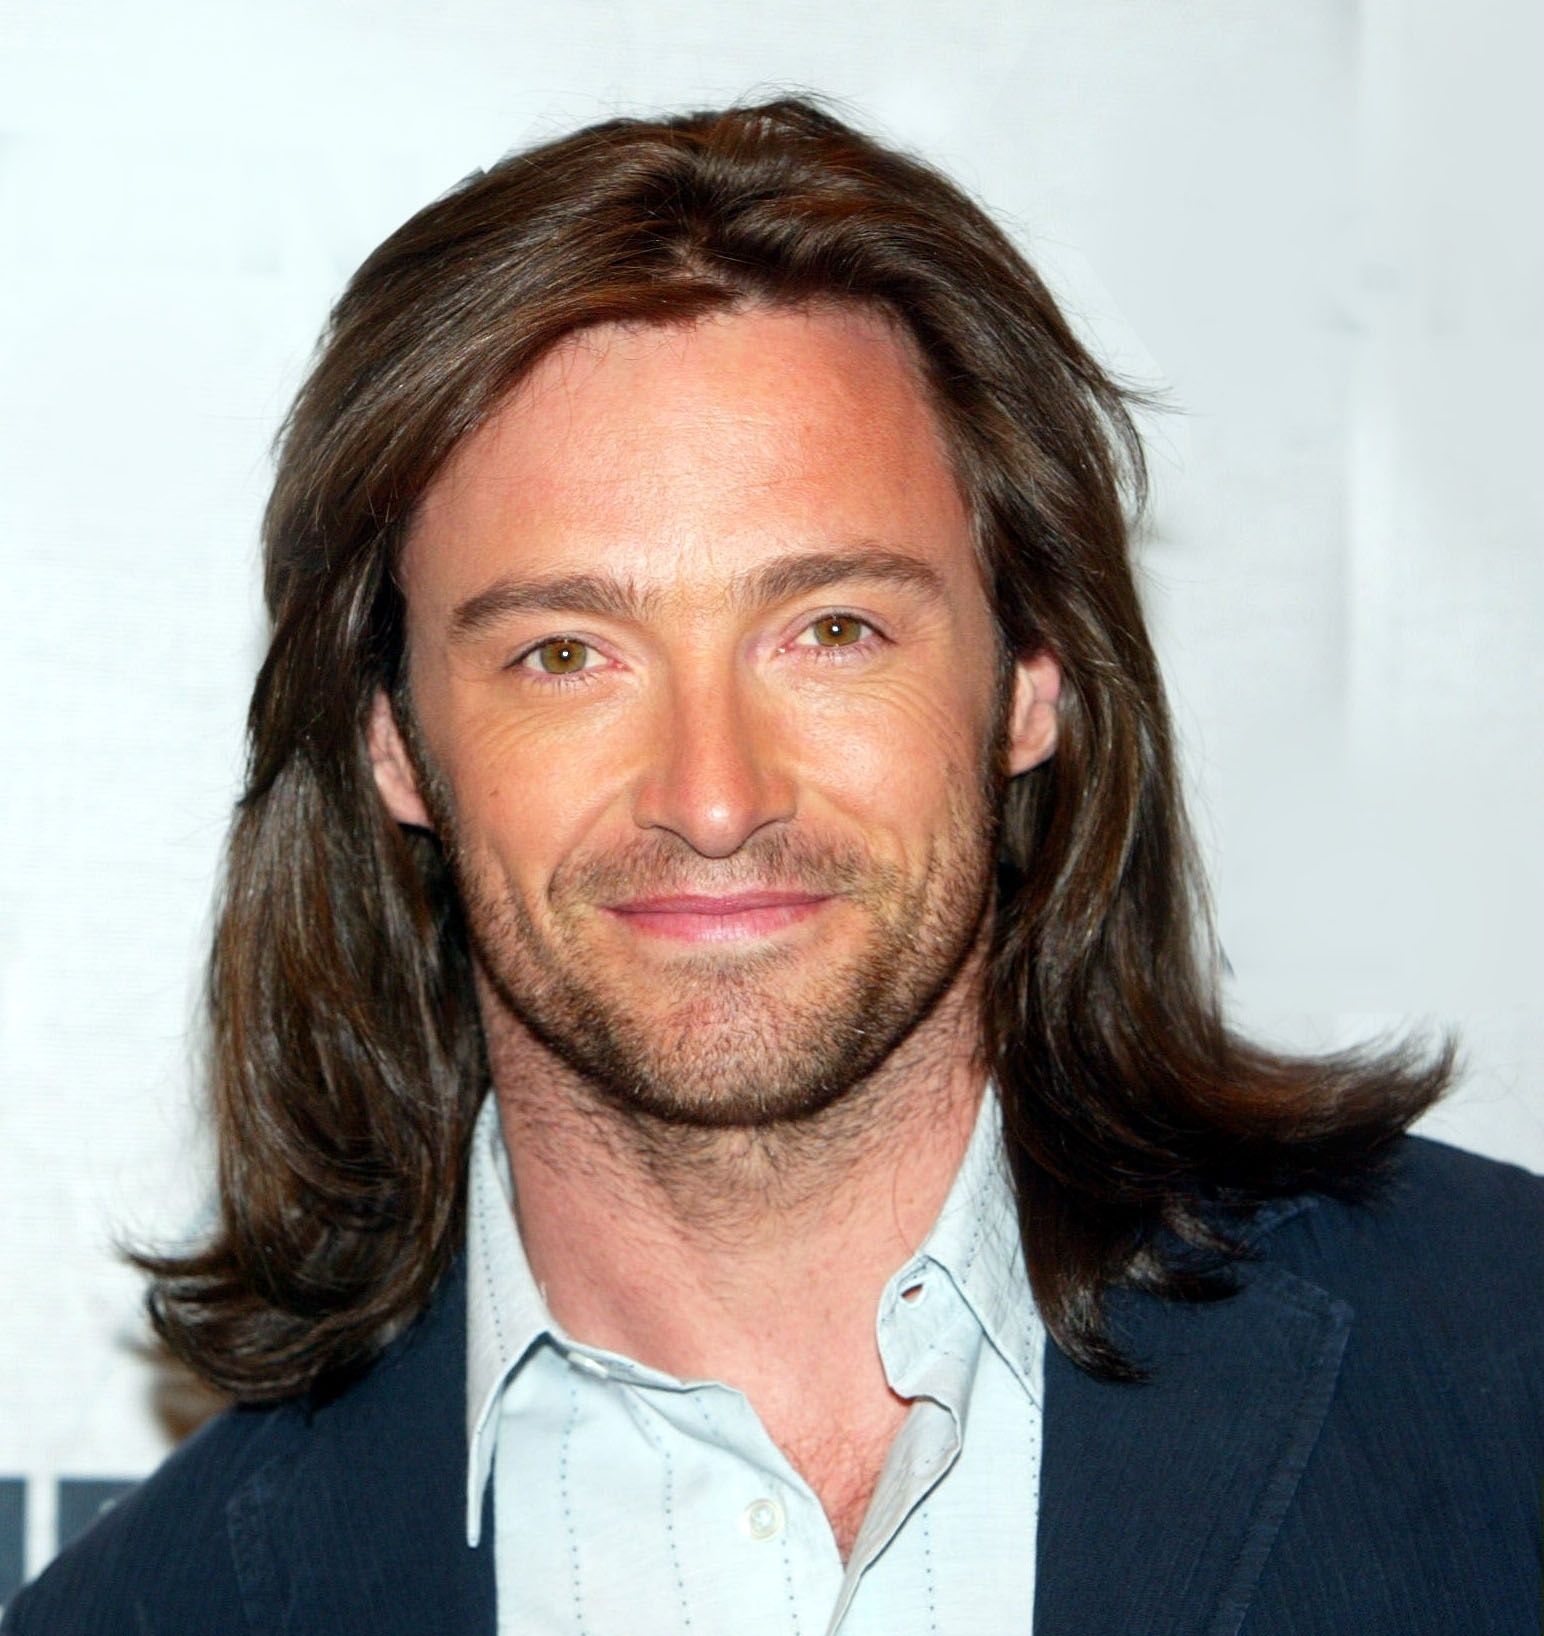 Chappie Isn't the First Time Hugh Jackman Has Had a Mullet